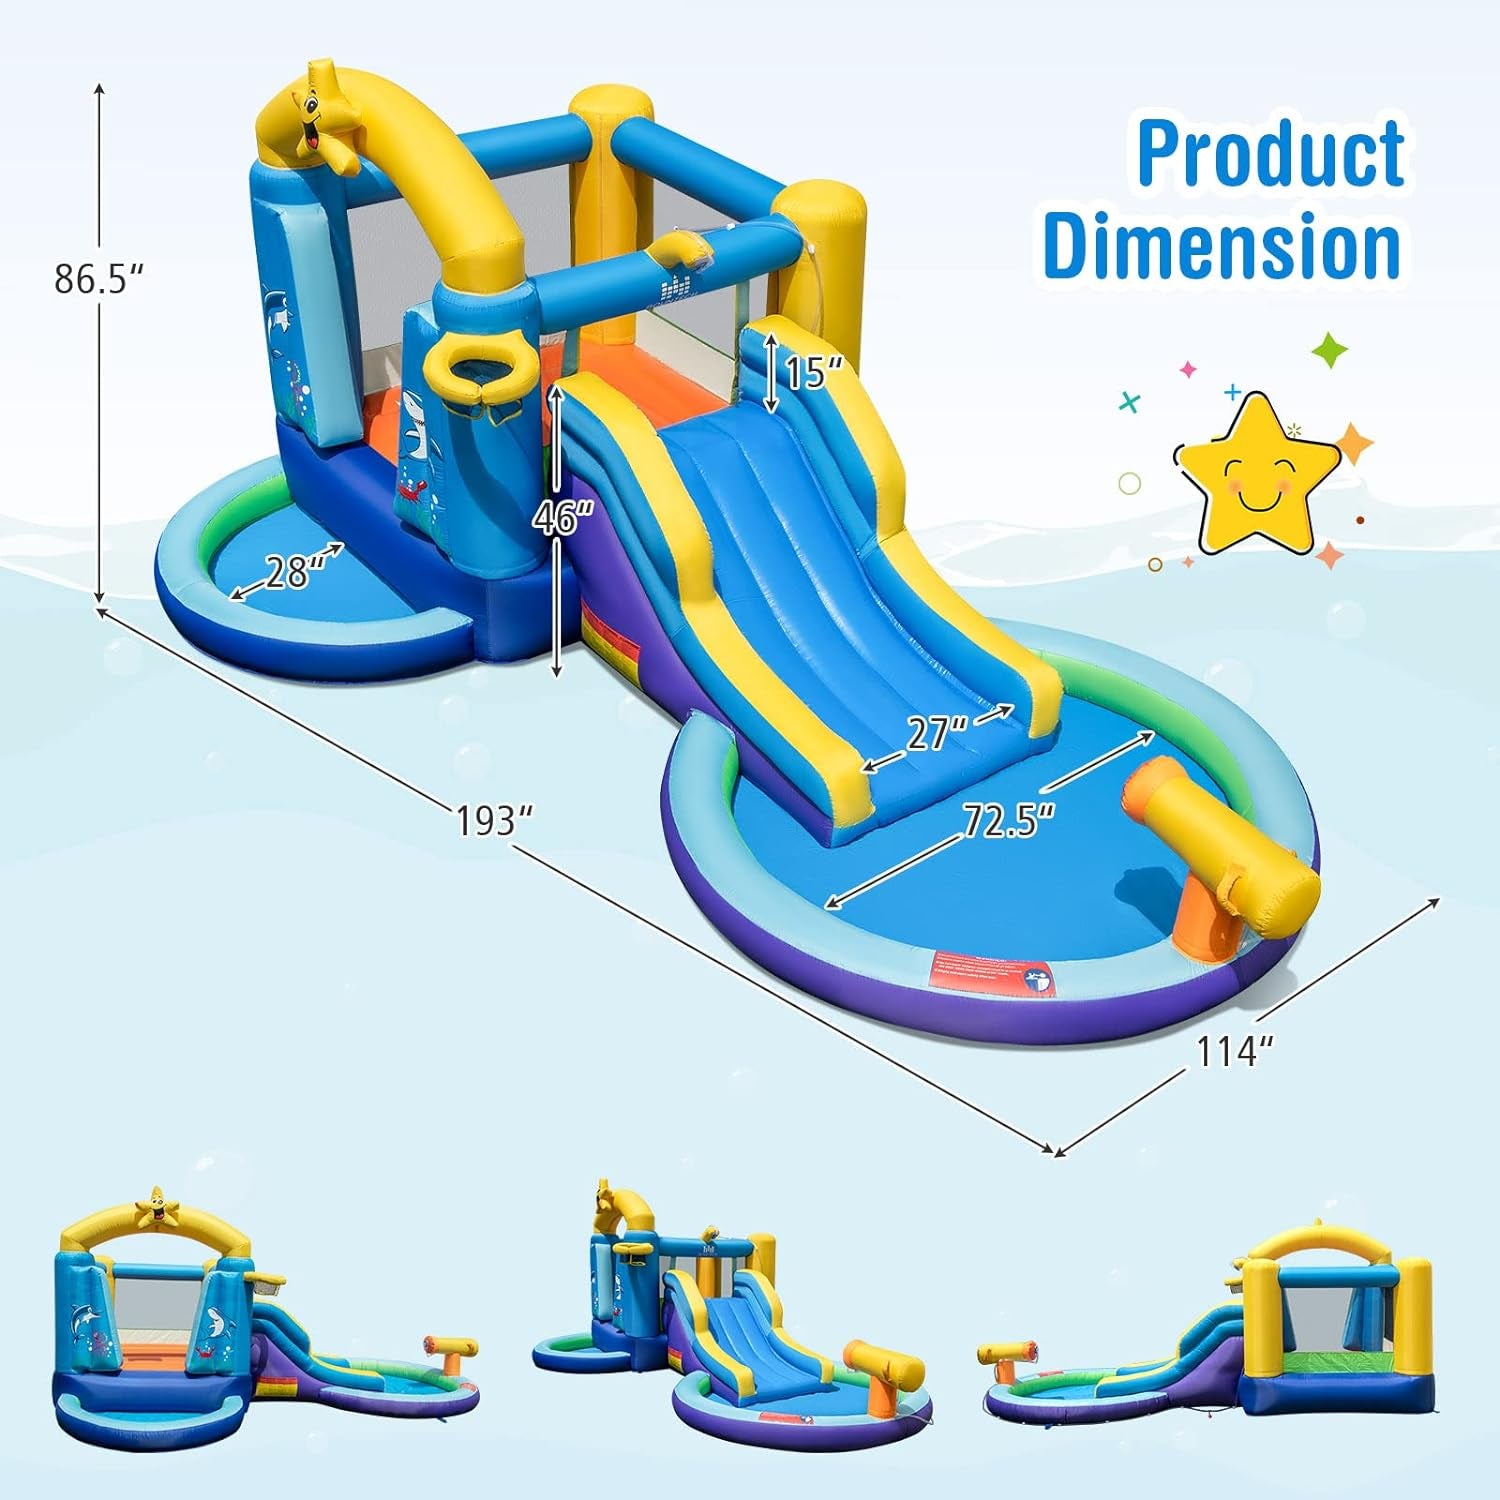 Inflatable Water Slide, 2 in 1 Ocean Bounce House Water Slide with Ball Pit & Splash Pool for Kids Outdoor Fun, Bouncy Castle Waterslides Inflatables for Kids Boys Girls Backyard Party Gifts